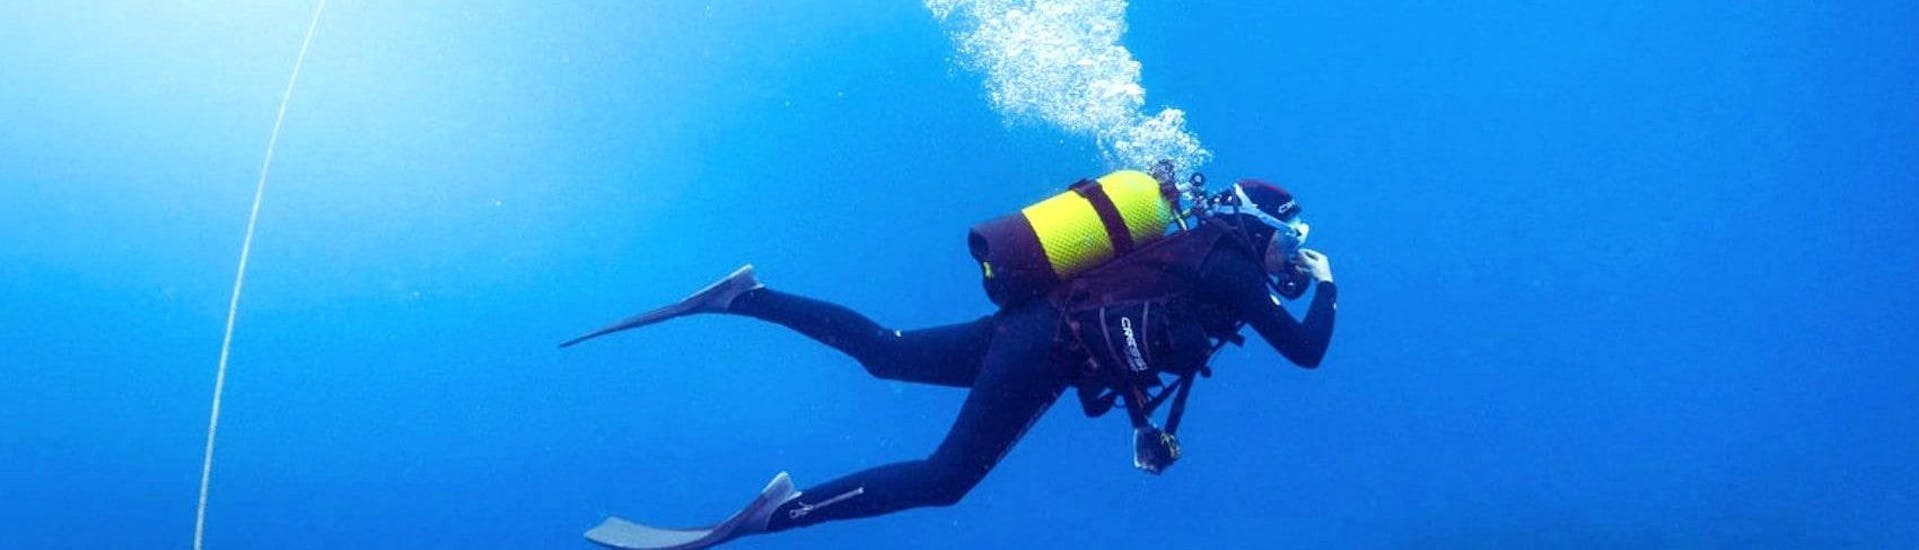 A diver is diving in complete autonomy thanks to their SSI Open Water Diver Course at Cap d'Antibes for Beginners for Beginners with BeFree2Dive.